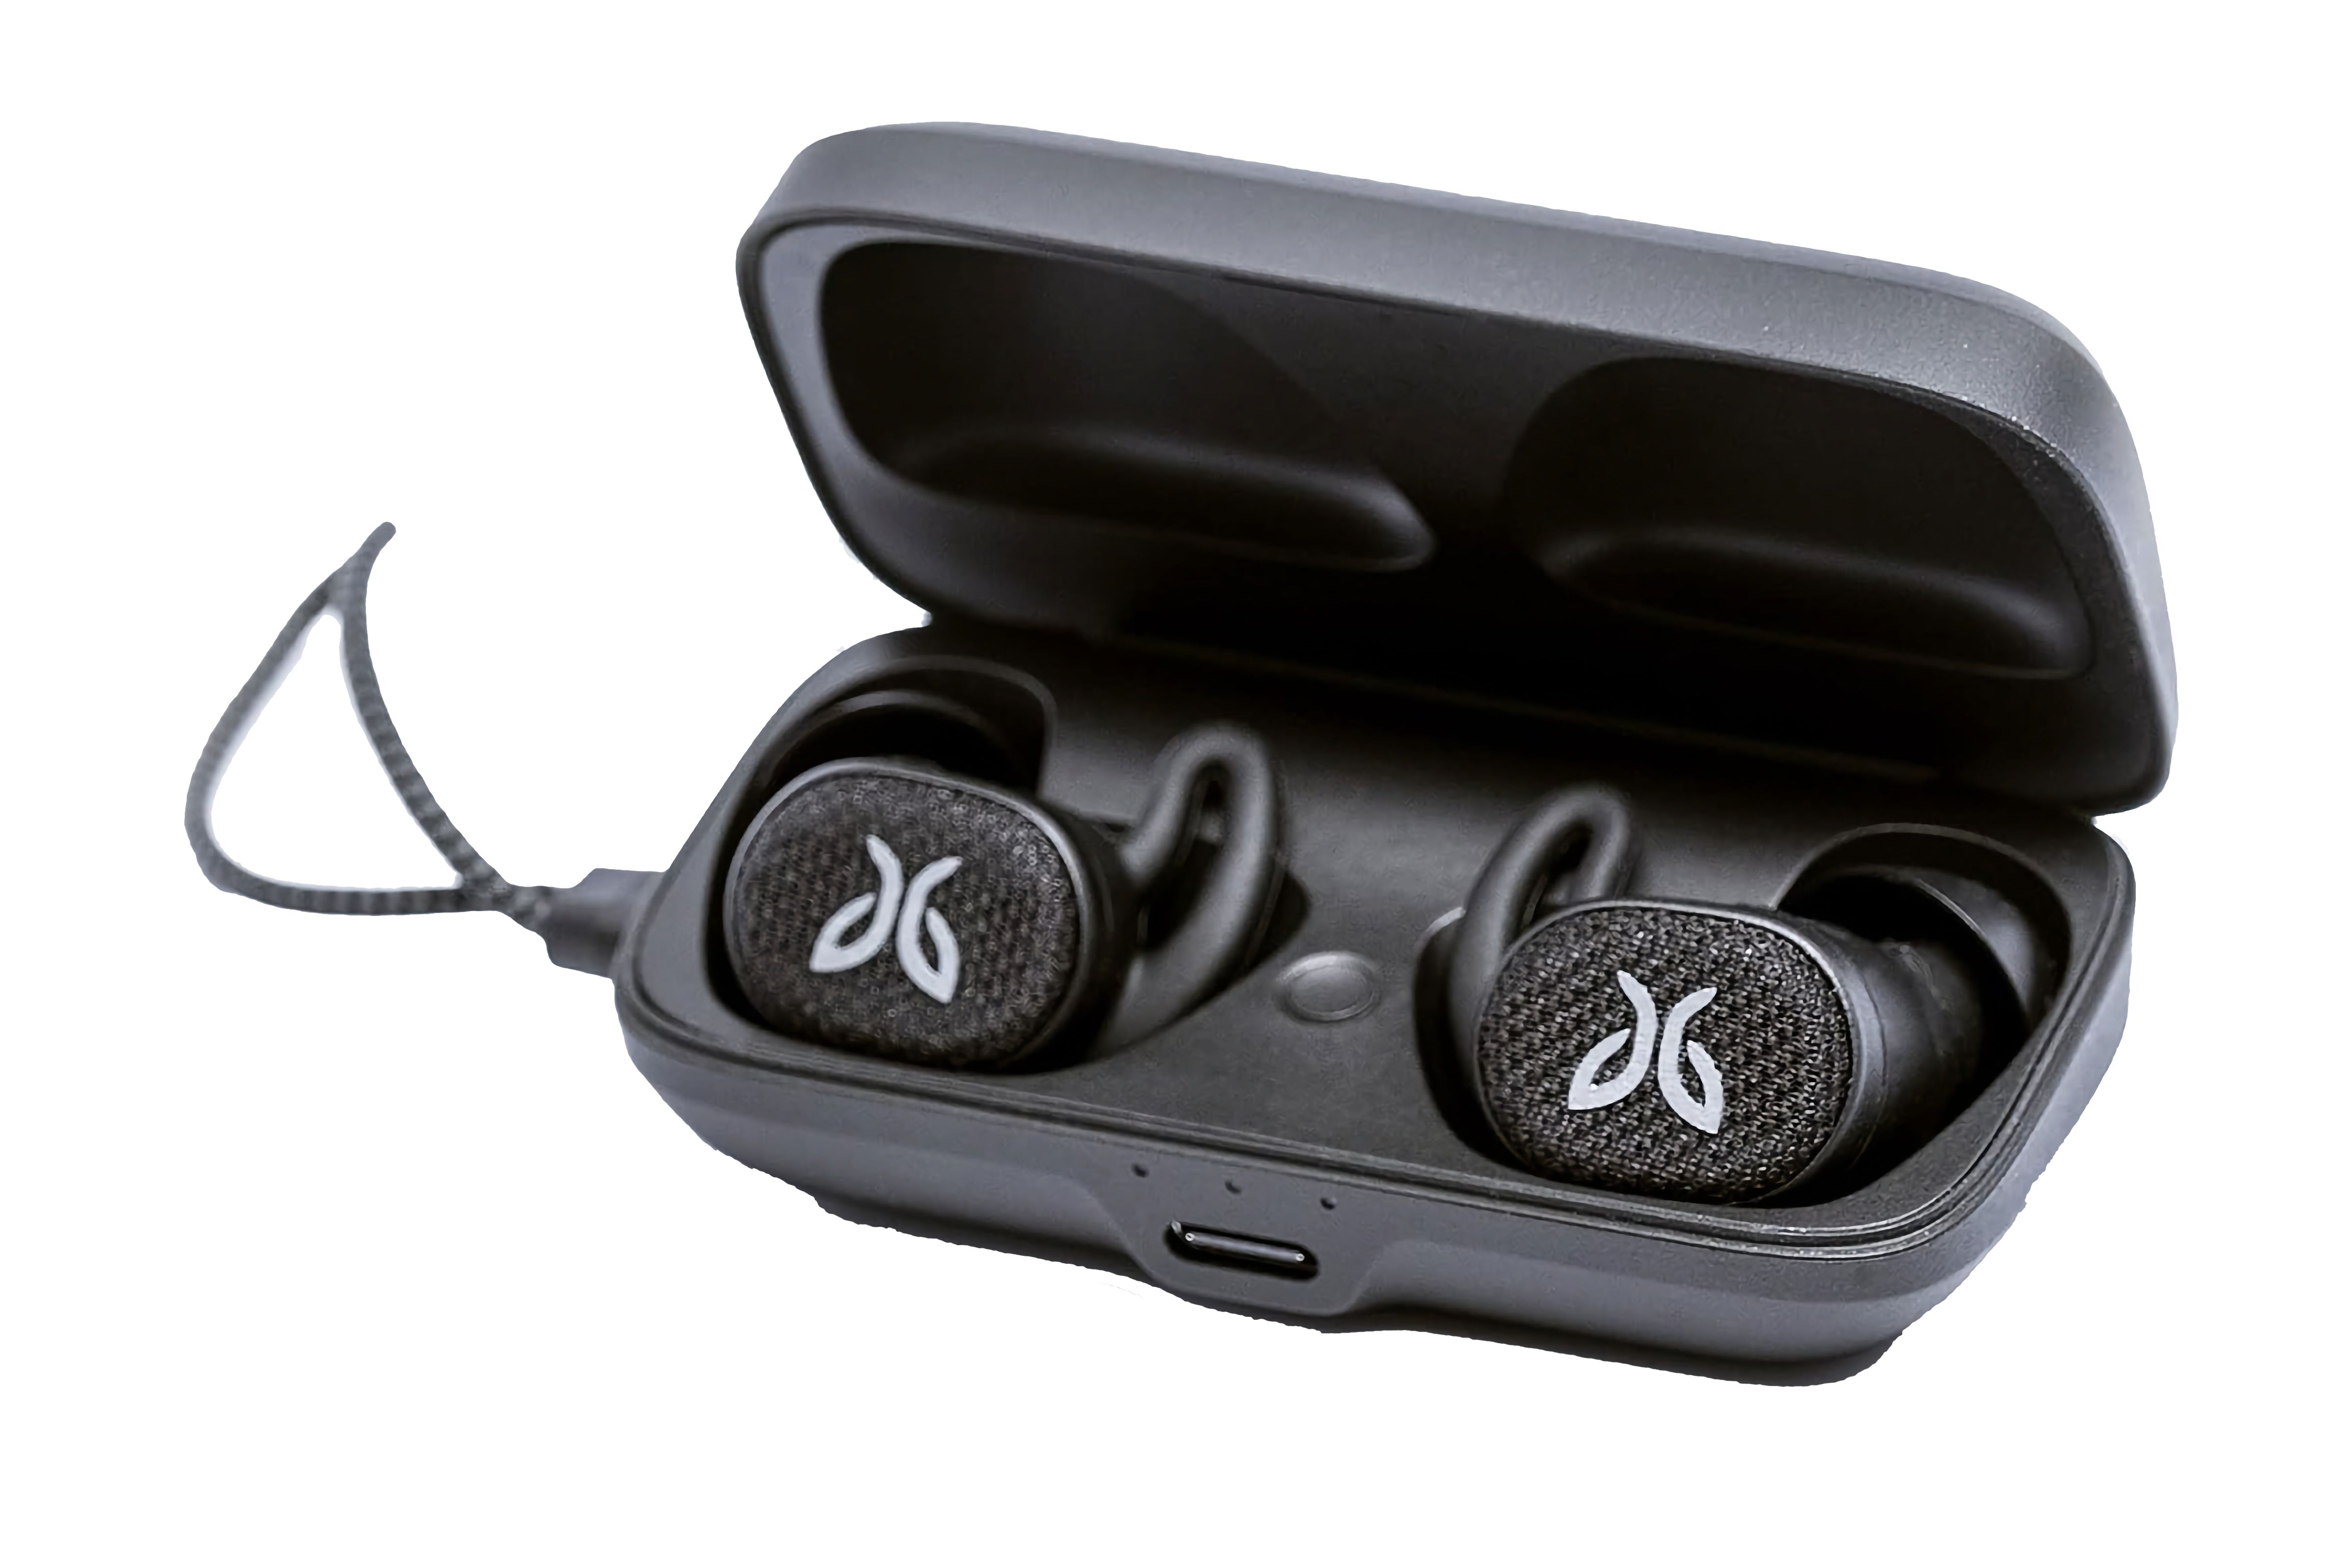 Black, textured headphones with wing tips, sitting in a charging case.